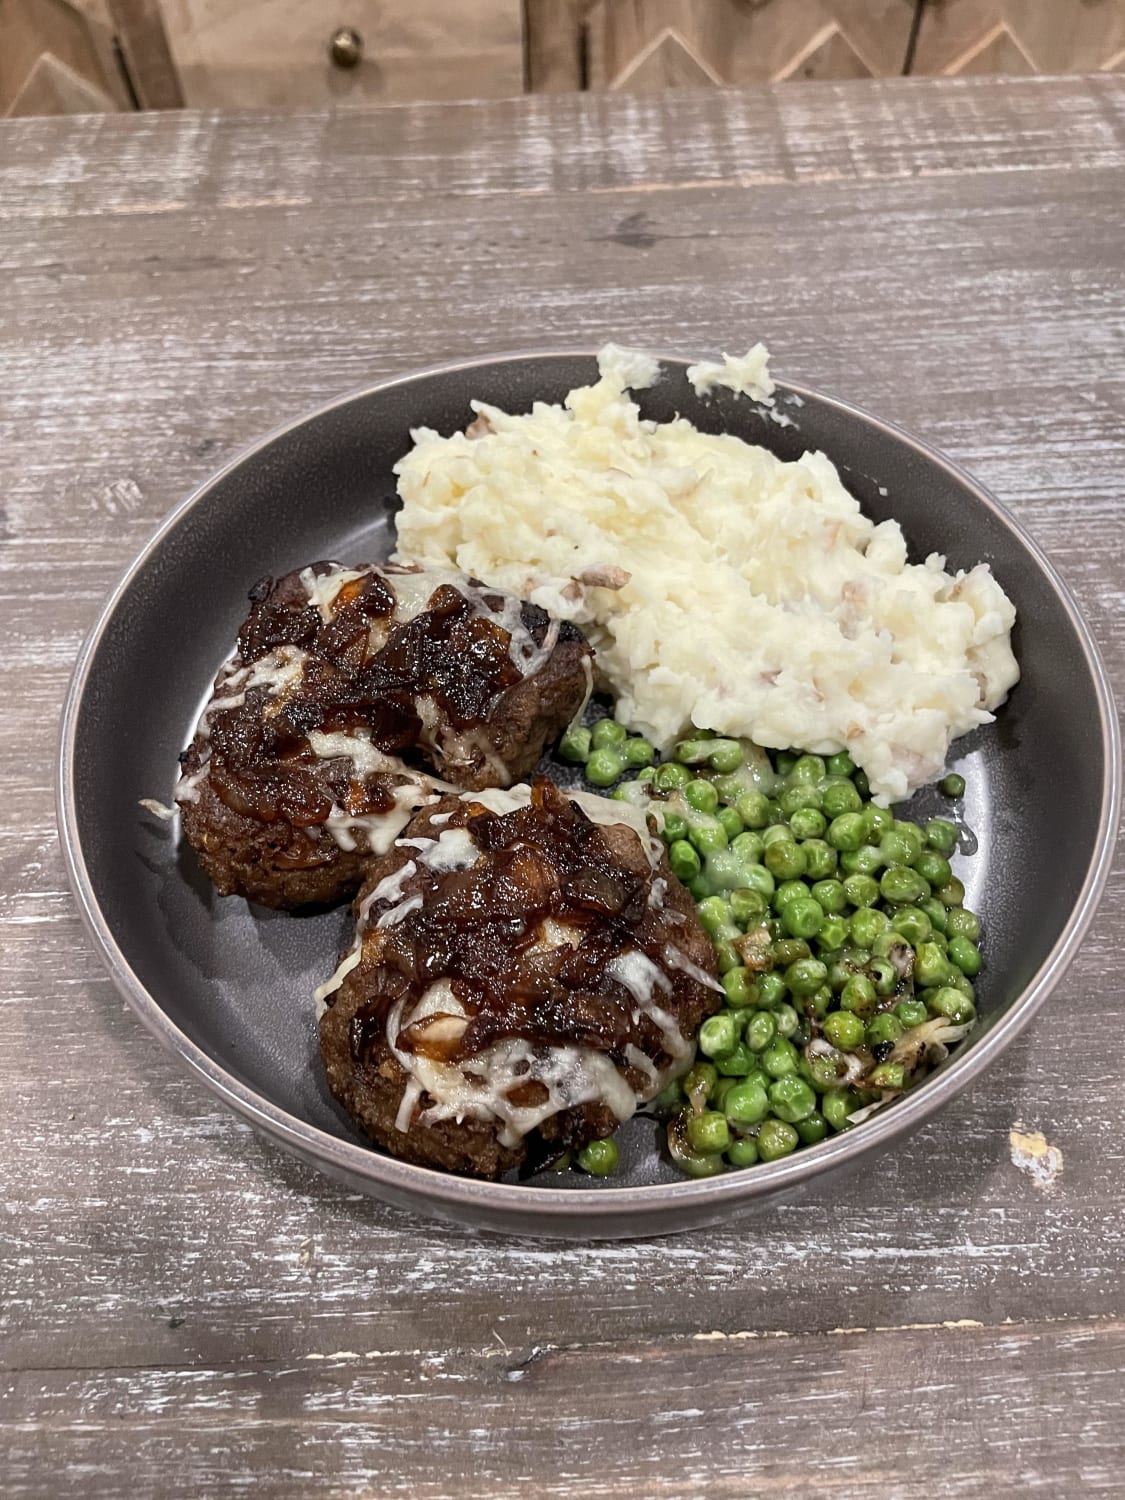 I’ve always loved Salisbury steak TV dinners, so I decided to make one from scratch!